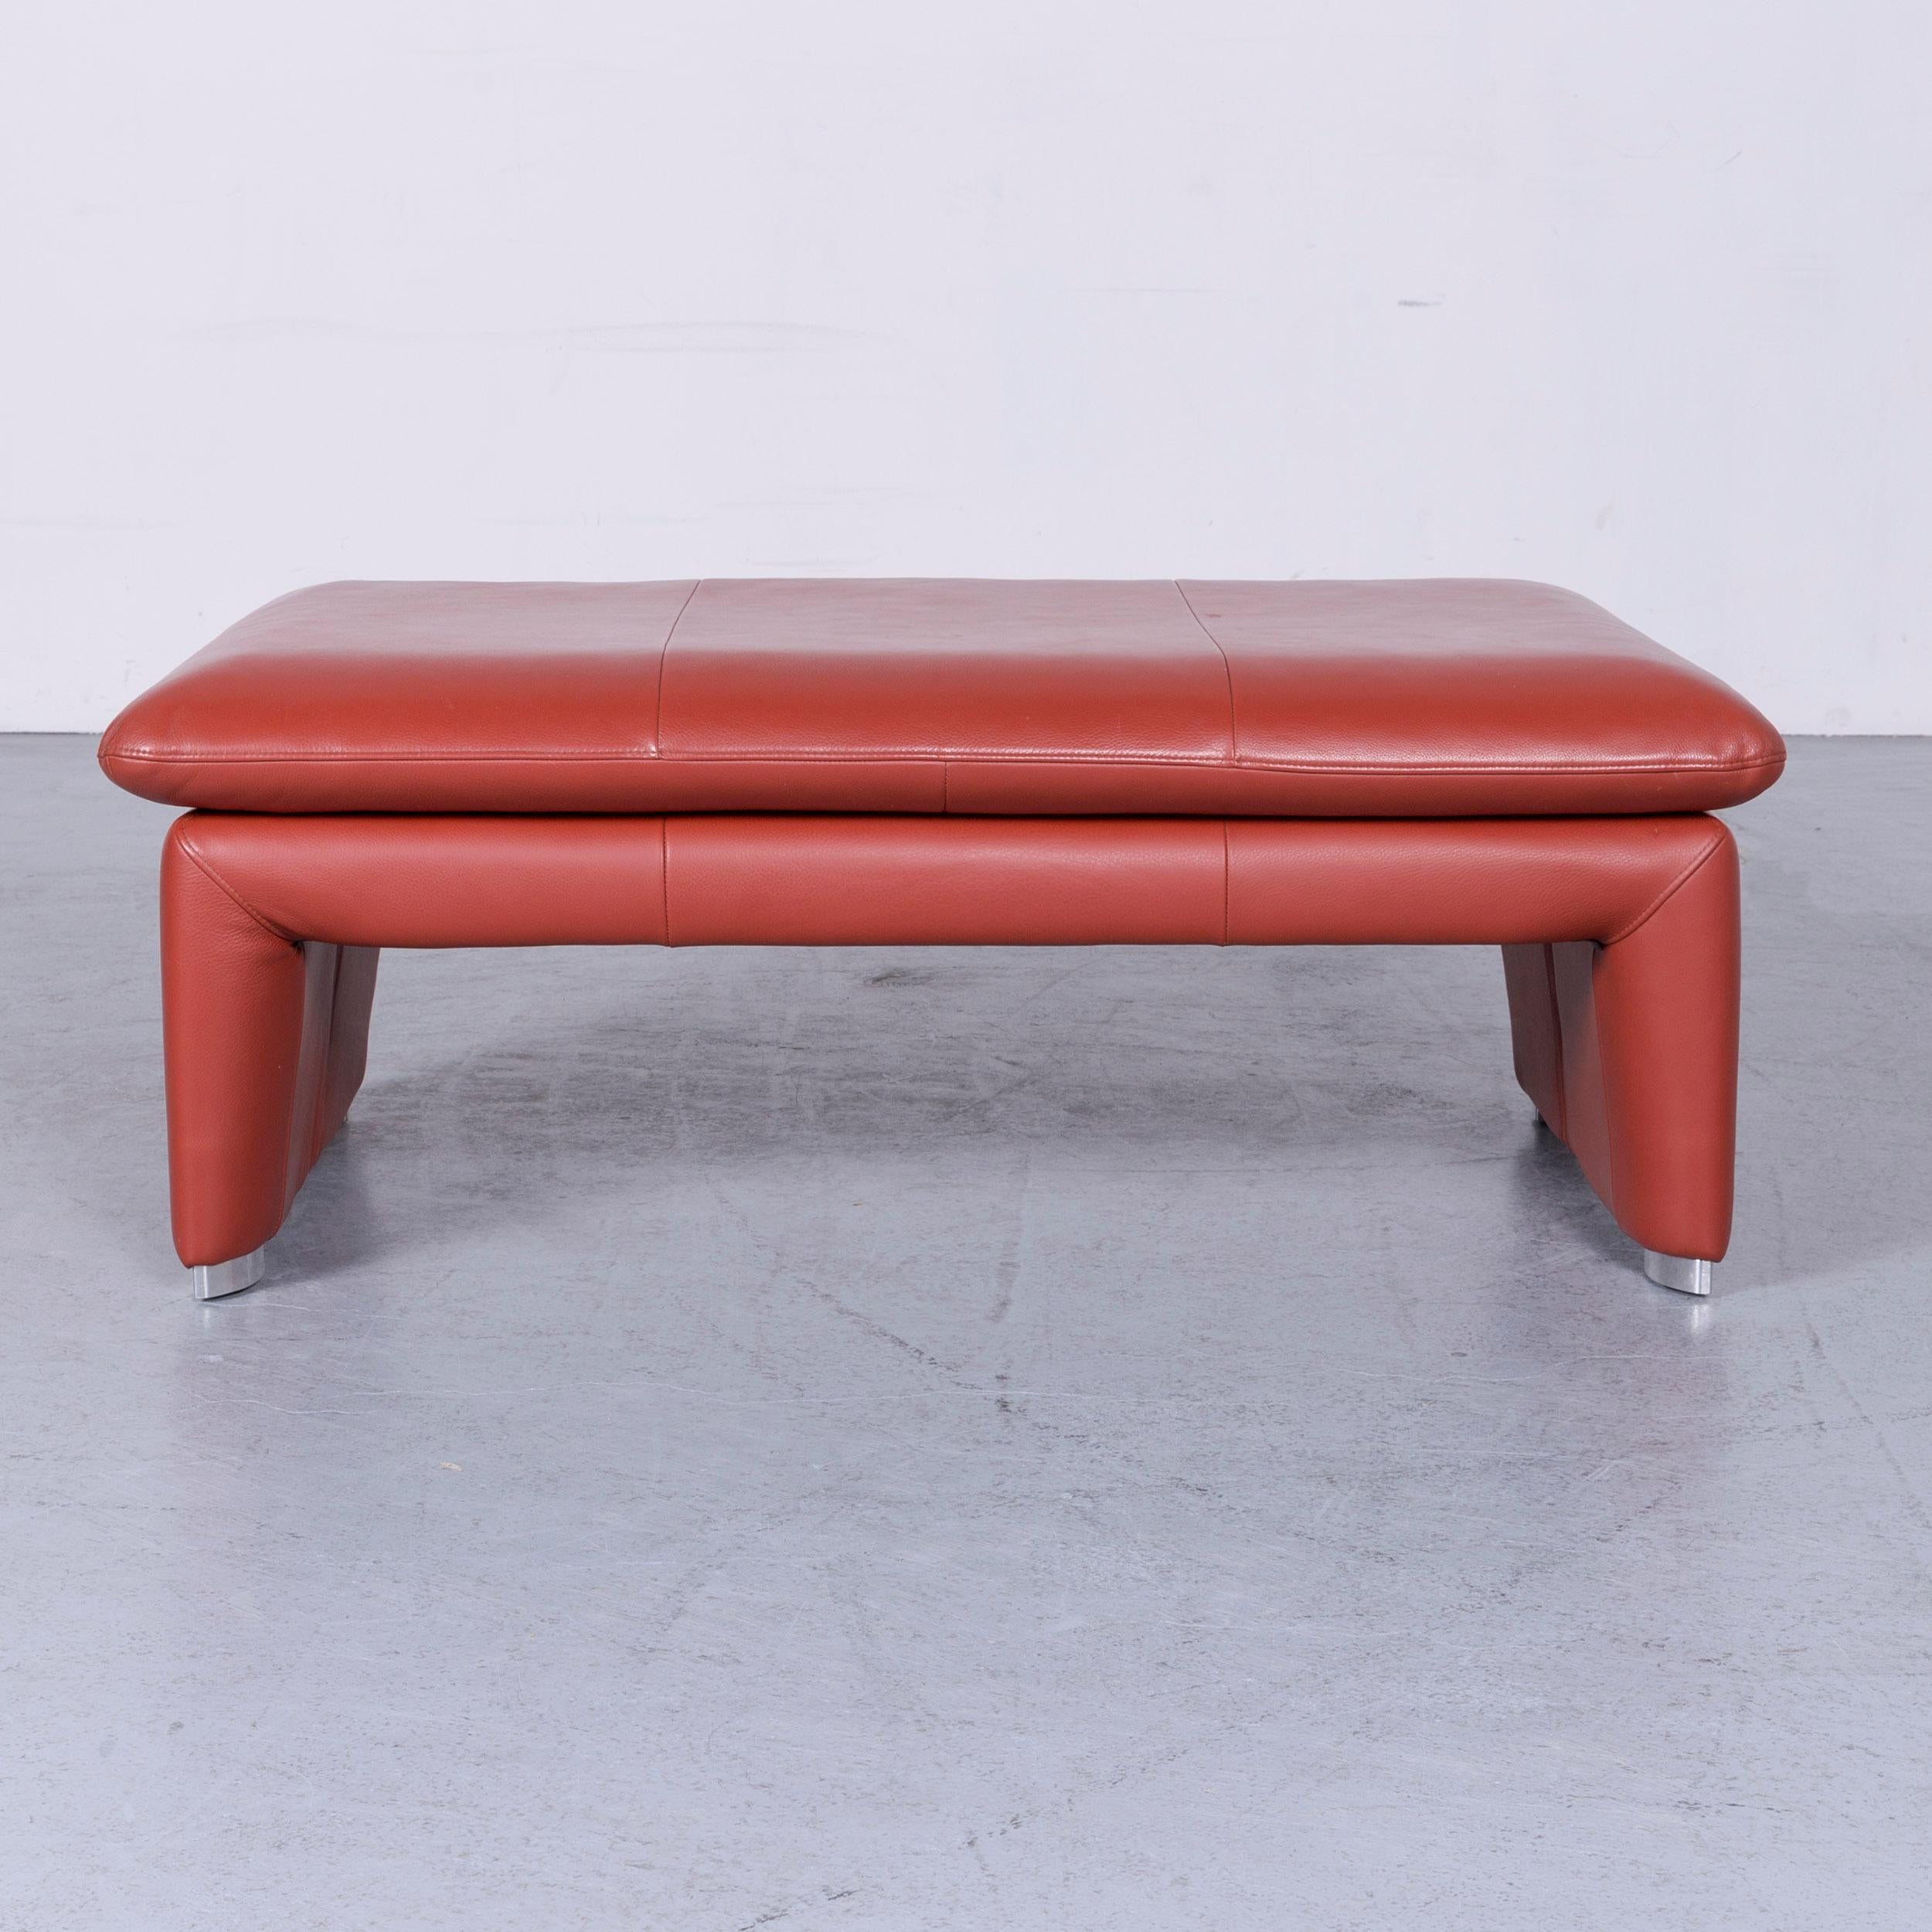 We bring to you a Laauser Corvus designer footstool leather red one seat couch modern.